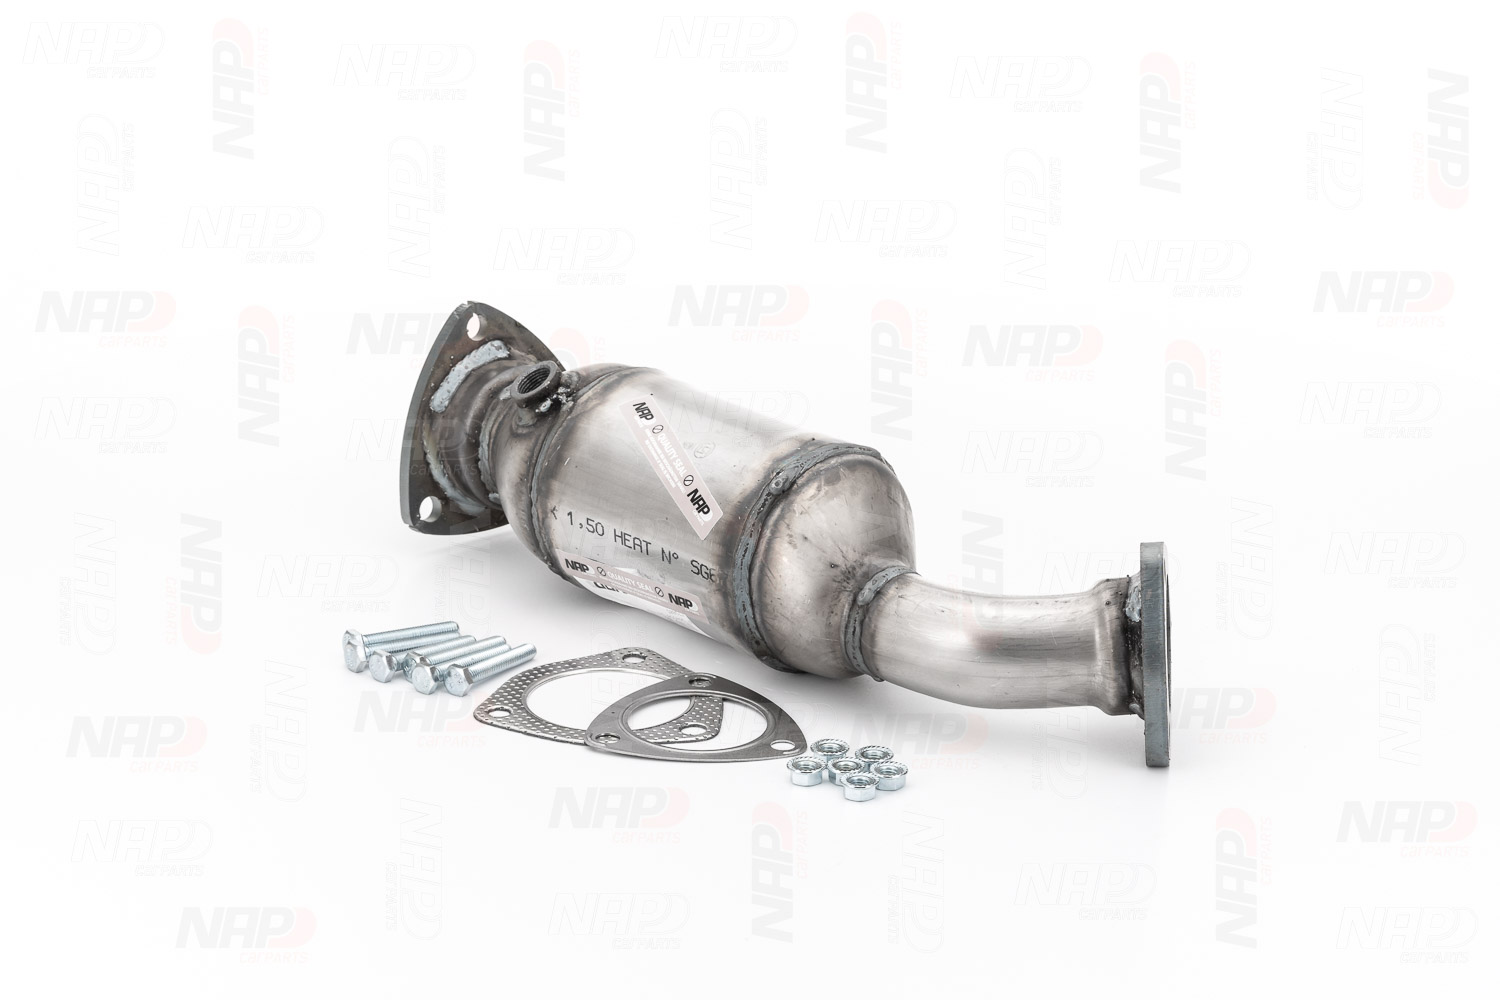 NAP carparts CAK10059 Catalytic converter Euro 3 (D3), D3, AEB/ APU/ AJL/ ANB/, ARK/ AWT, with attachment material, Length: 420 mm